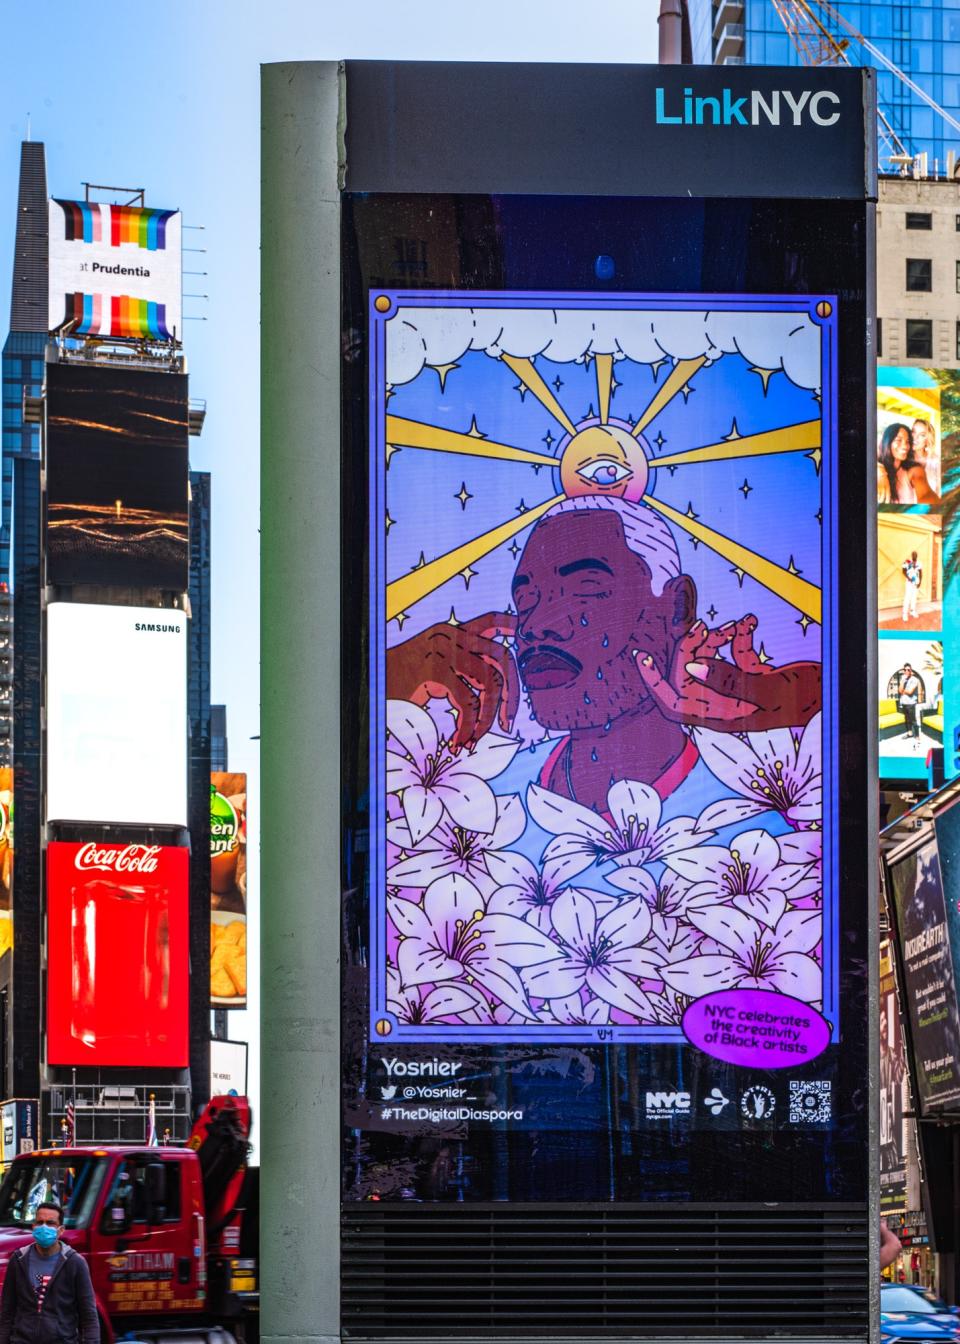 Yosnier's “I'll Be Okay Soon” displayed on the corner of 45th and Broadway in NYC.